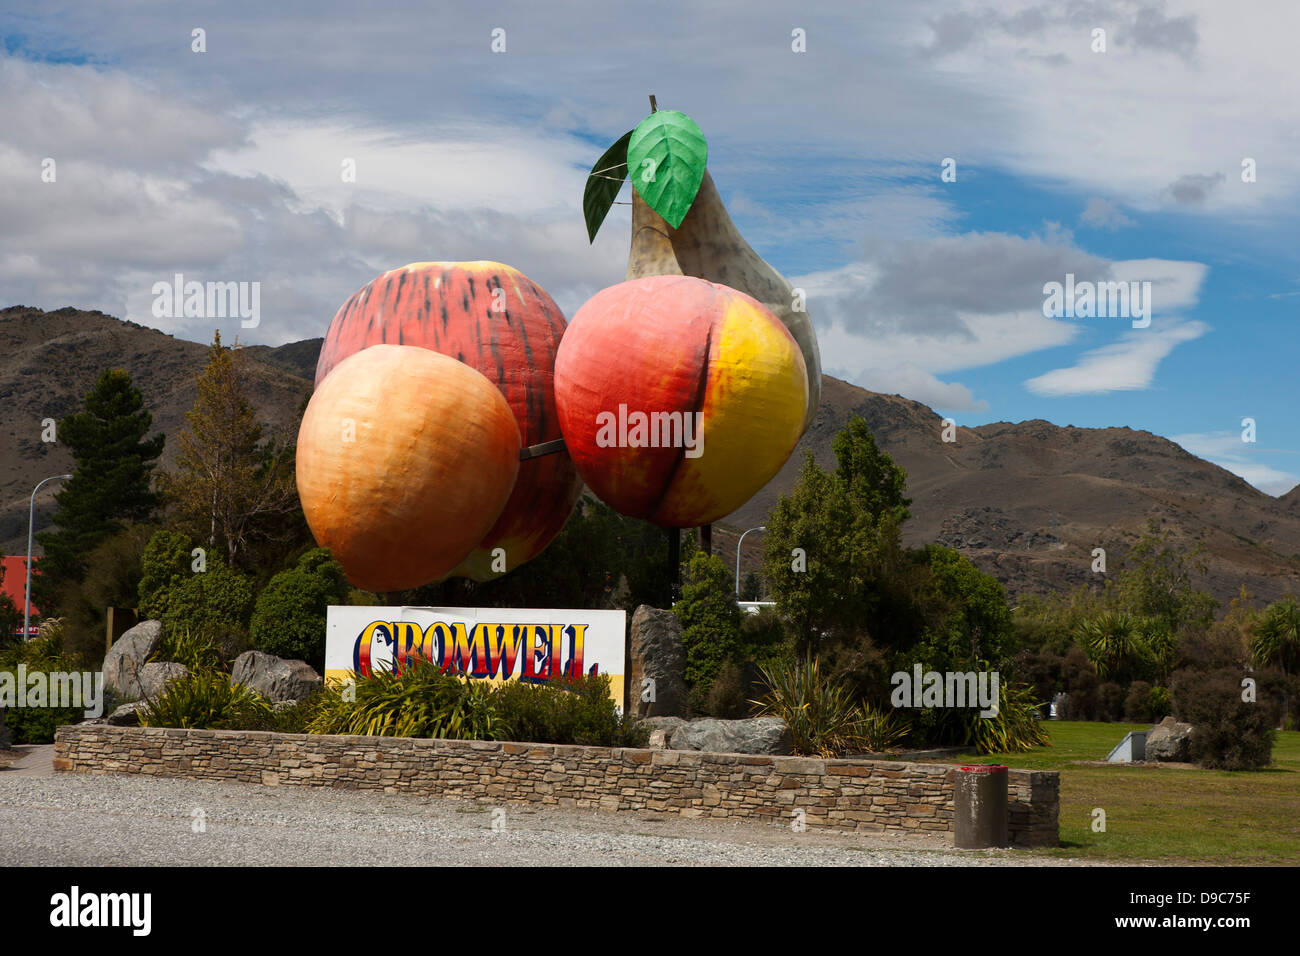 Sculpture of large pieces of fruit with a sign, Cromwell, South Island, New Zealand Stock Photo